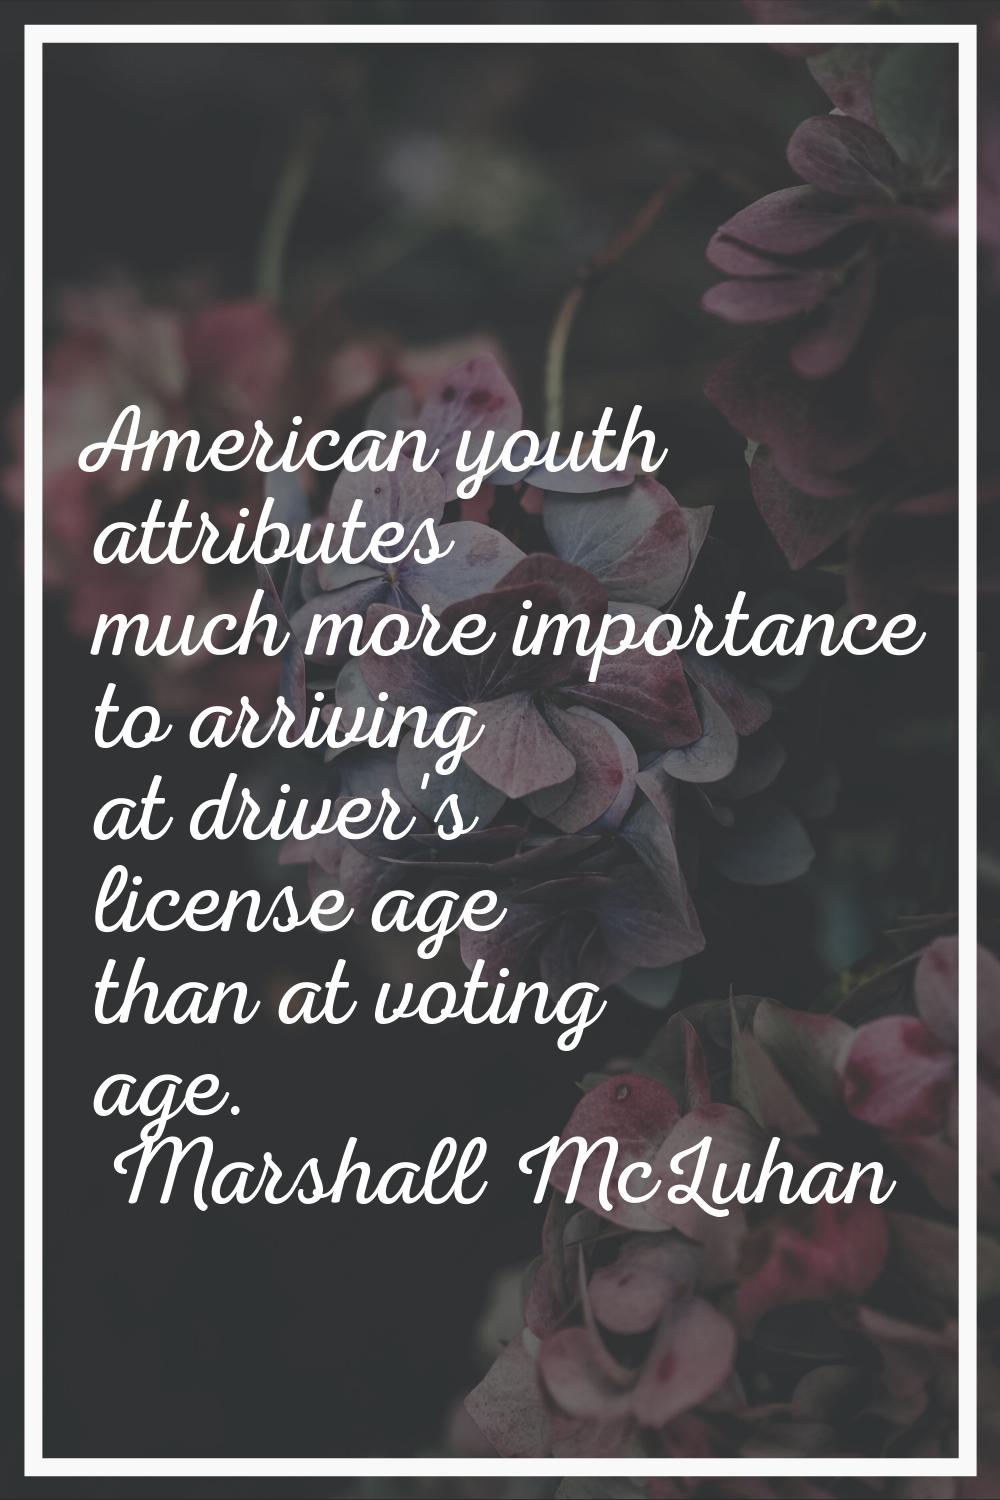 American youth attributes much more importance to arriving at driver's license age than at voting a